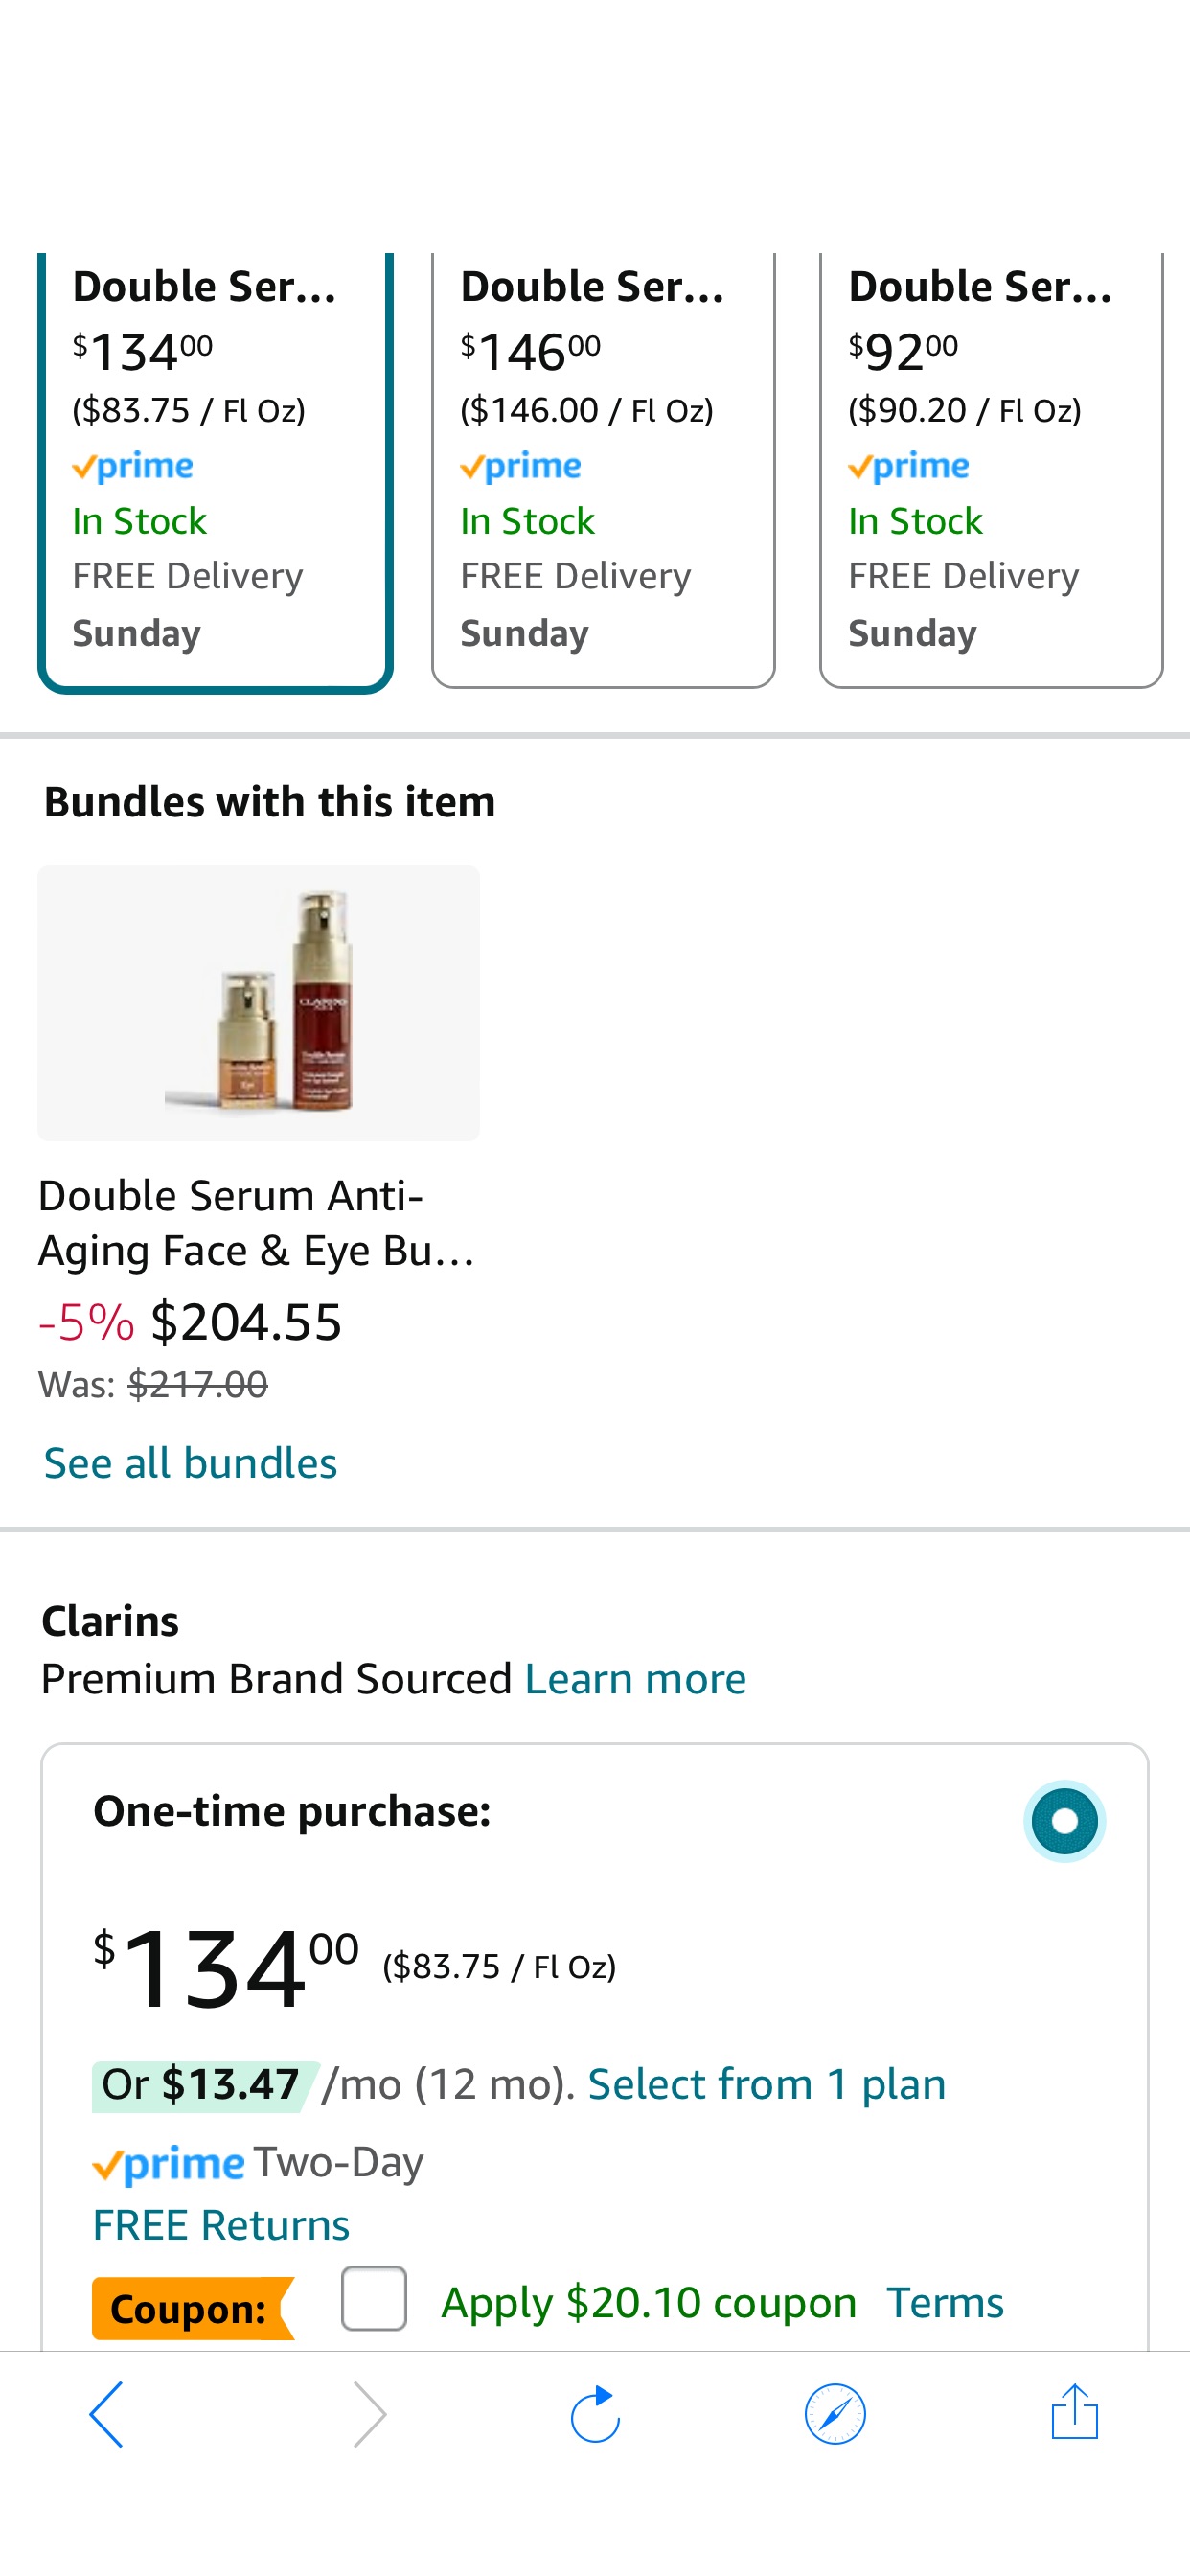 Amazon.com: Clarins Double Serum | Anti-Aging | Visibly Firms, Smoothes and Boosts Radiance| 21 Plant Ingredients, Including Turmeric | All Skin Types, Ages and Ethnicities : Beauty & Personal Care 双萃